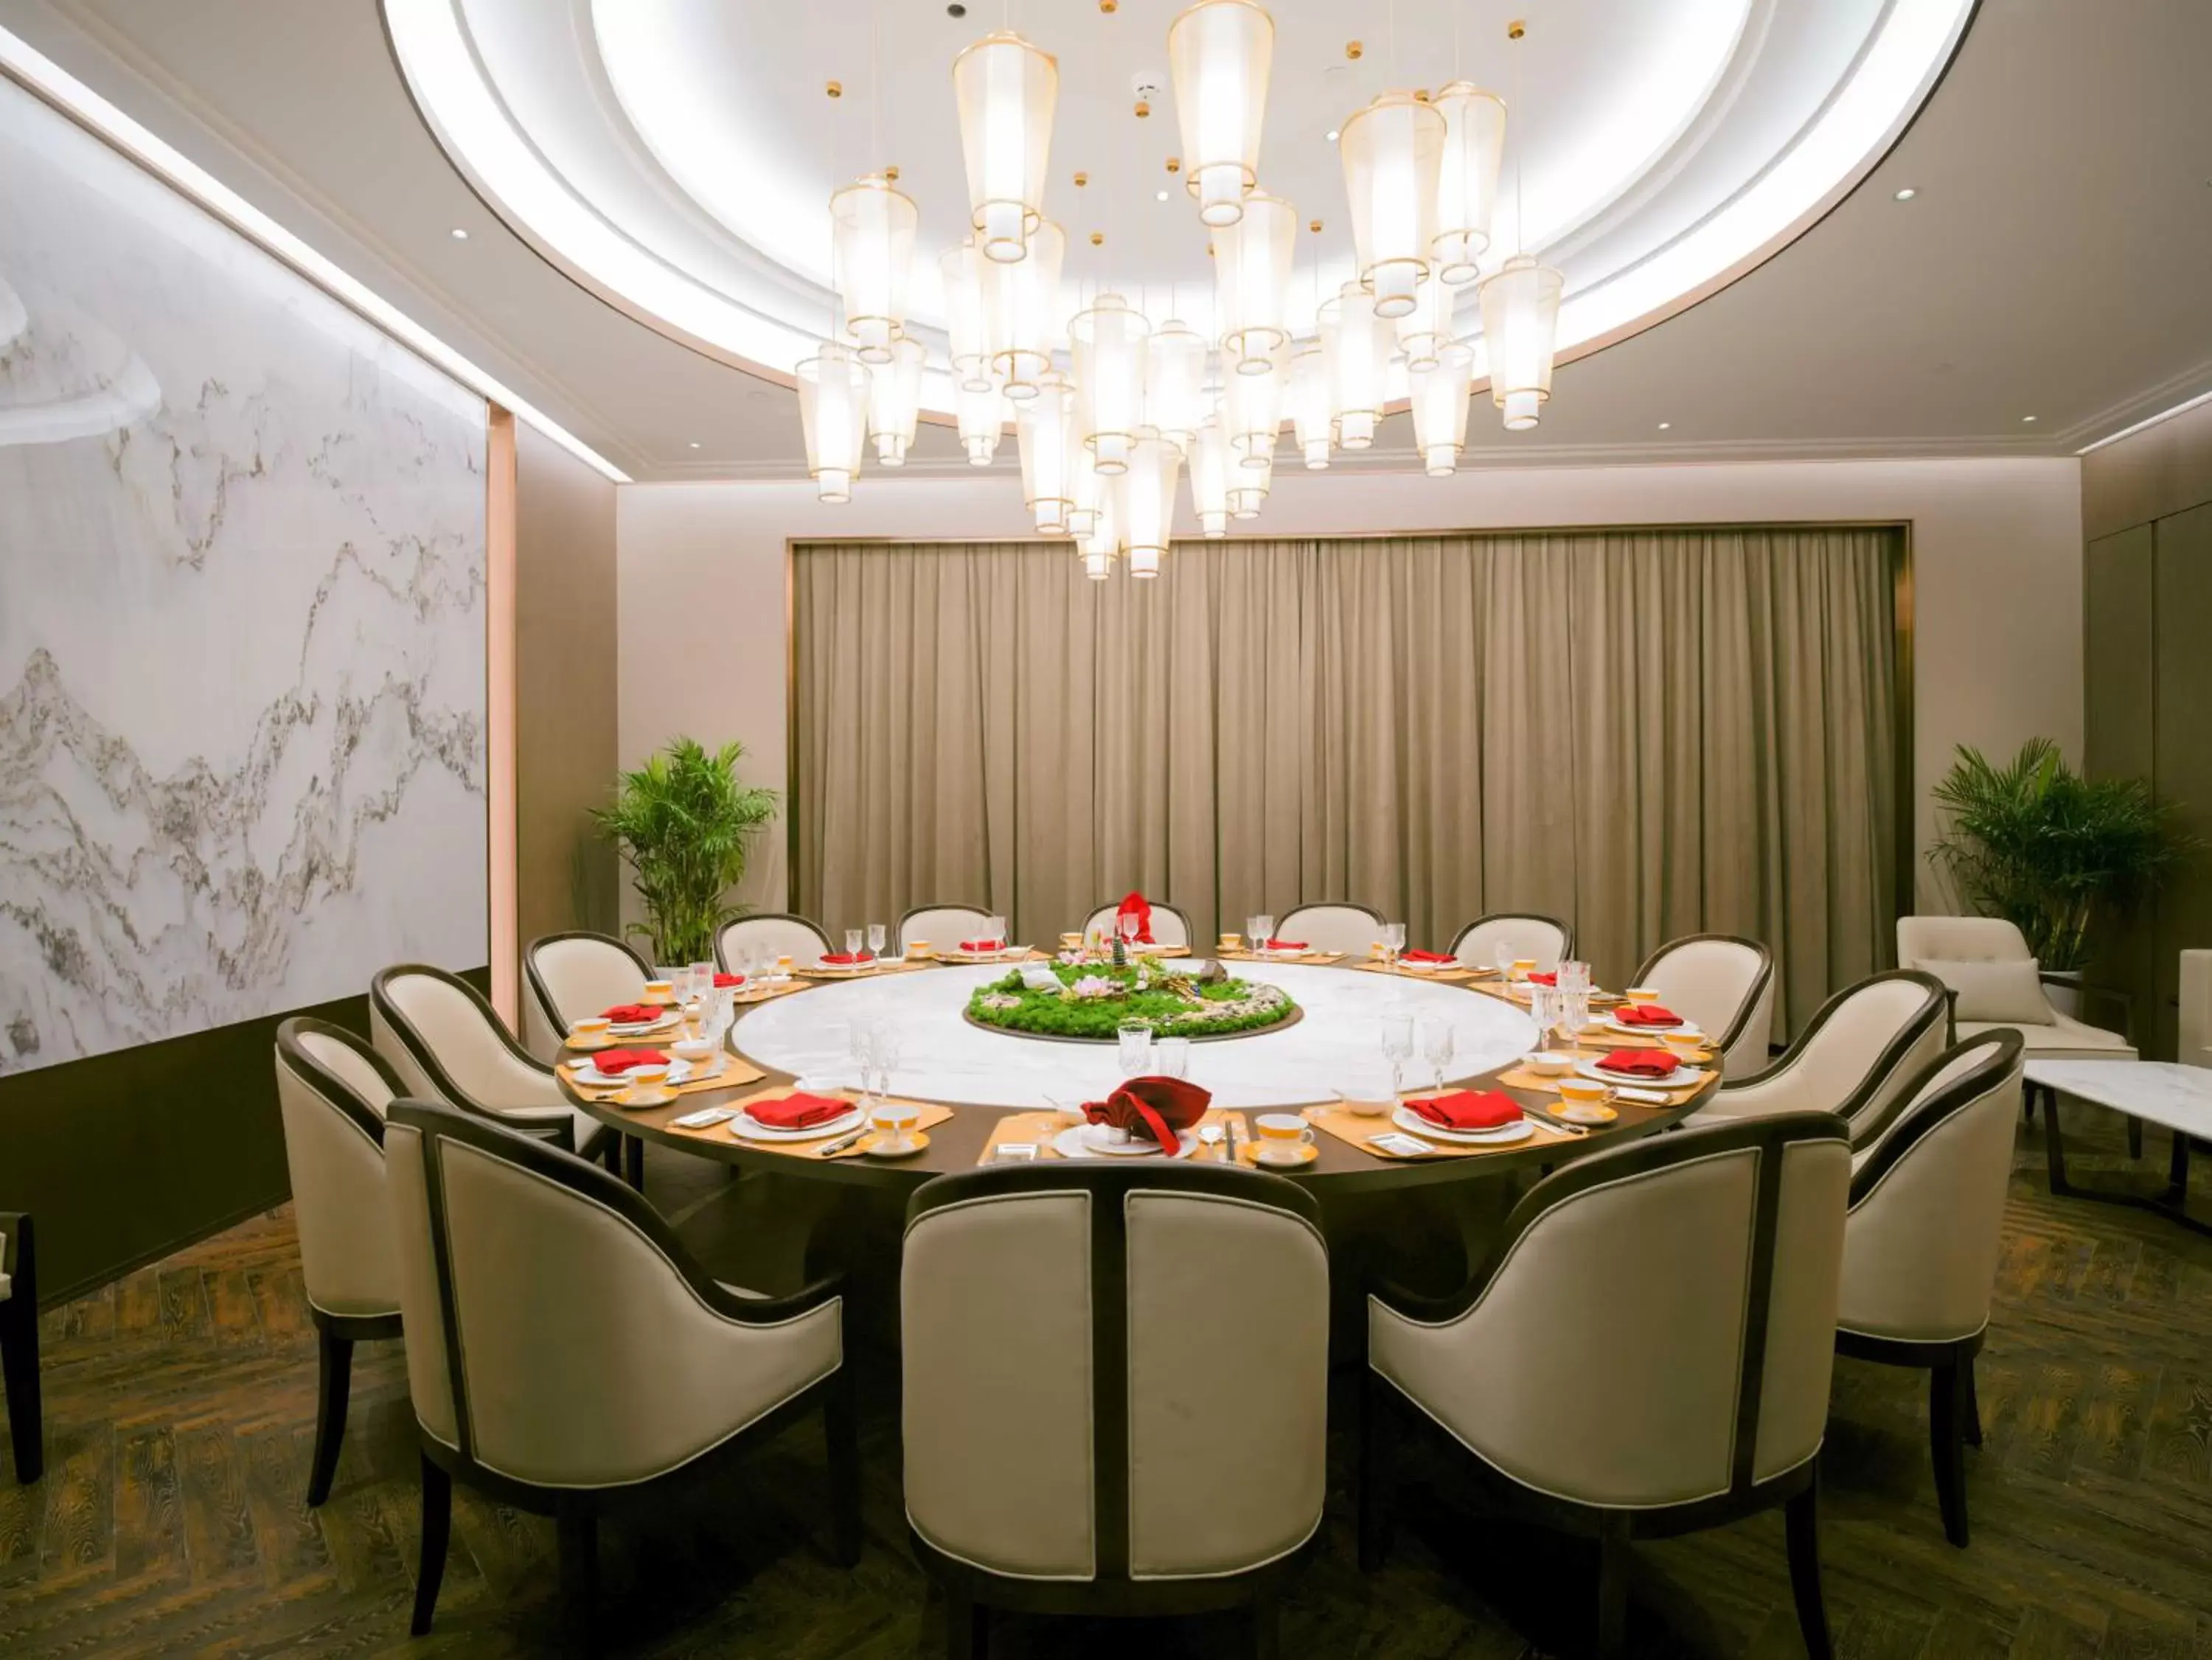 Banquet/Function facilities, Banquet Facilities in Ramada Plaza Shanghai Pudong Airport - A journey starts at the PVG Airport